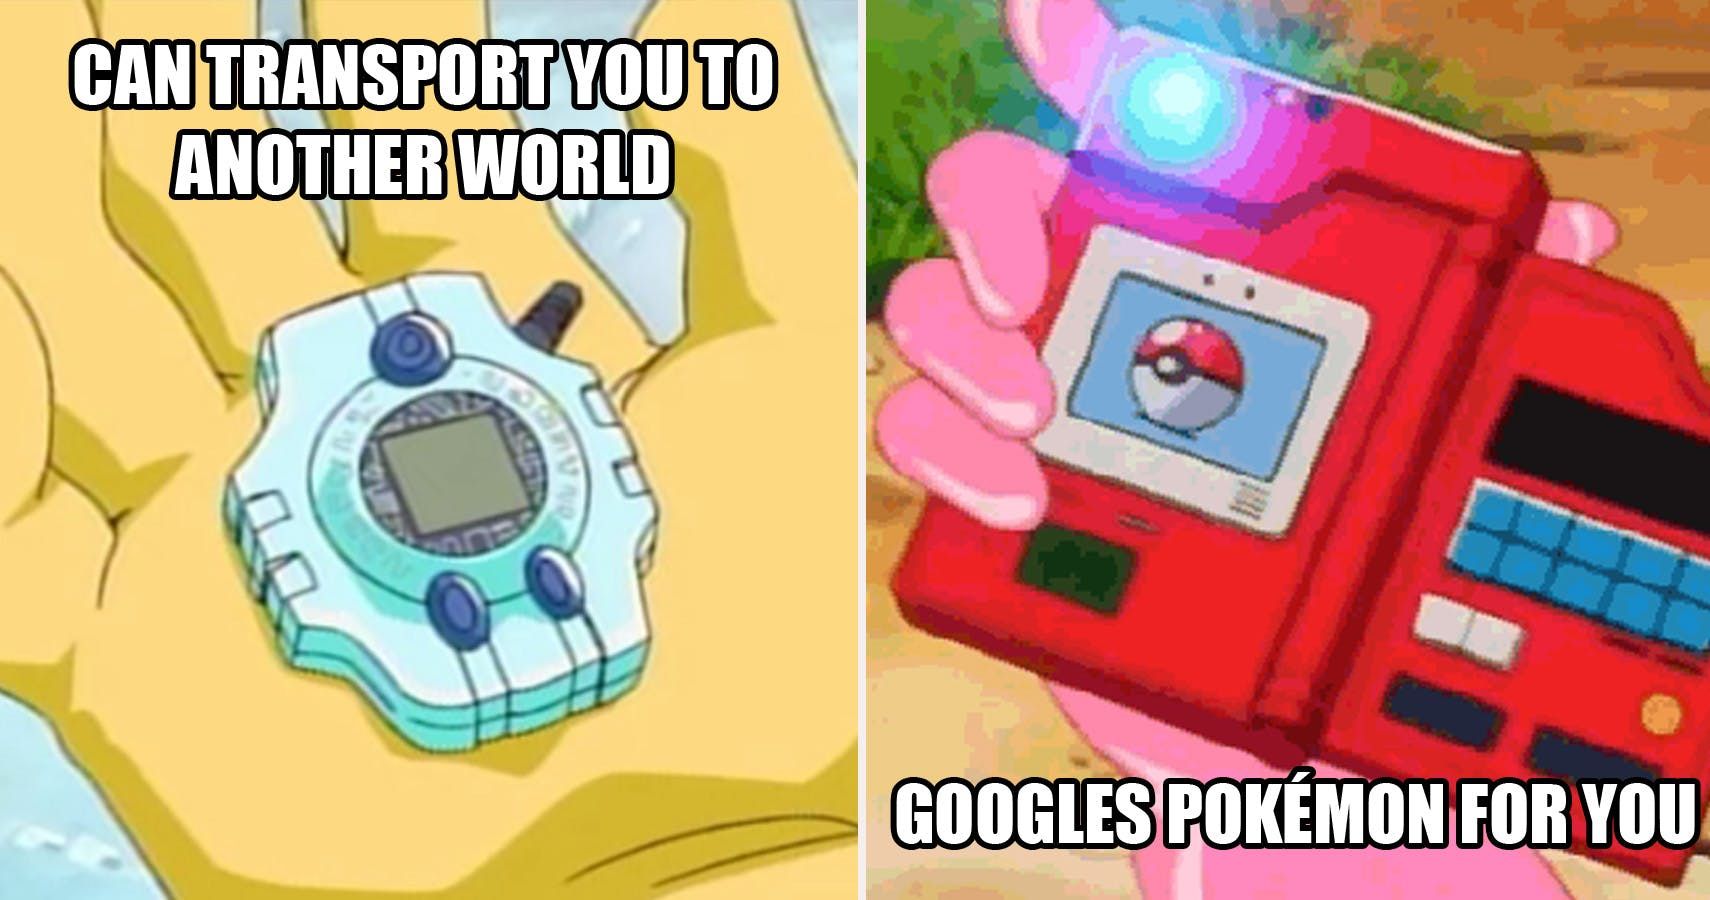 Pokémon Vs Digimon Memes That Are Too Hilarious For Words